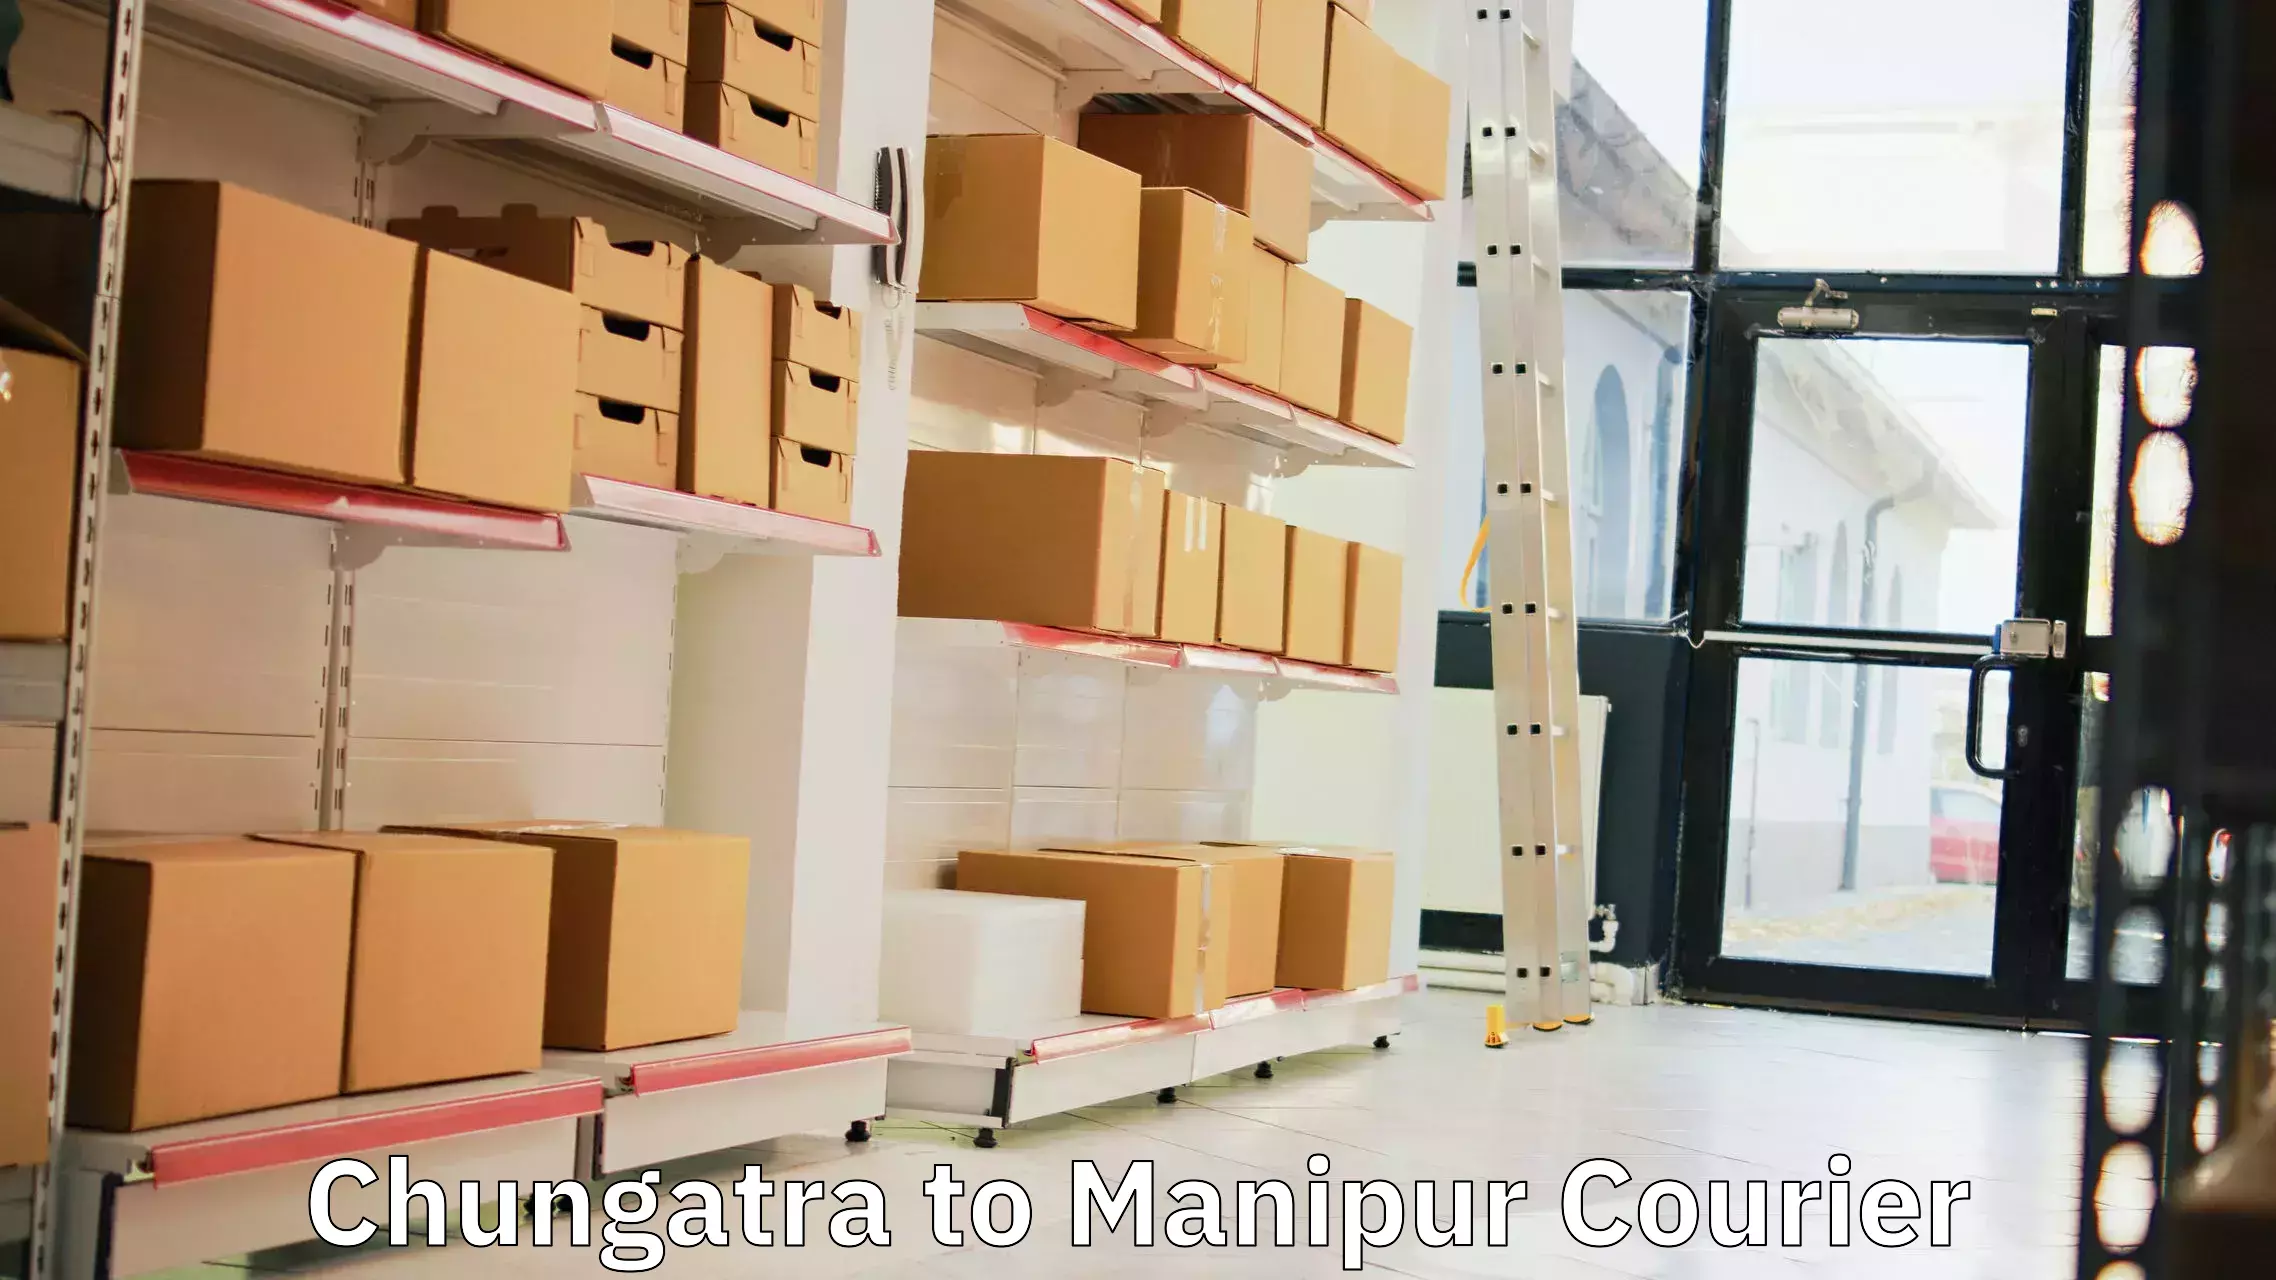 Next-day freight services Chungatra to Manipur